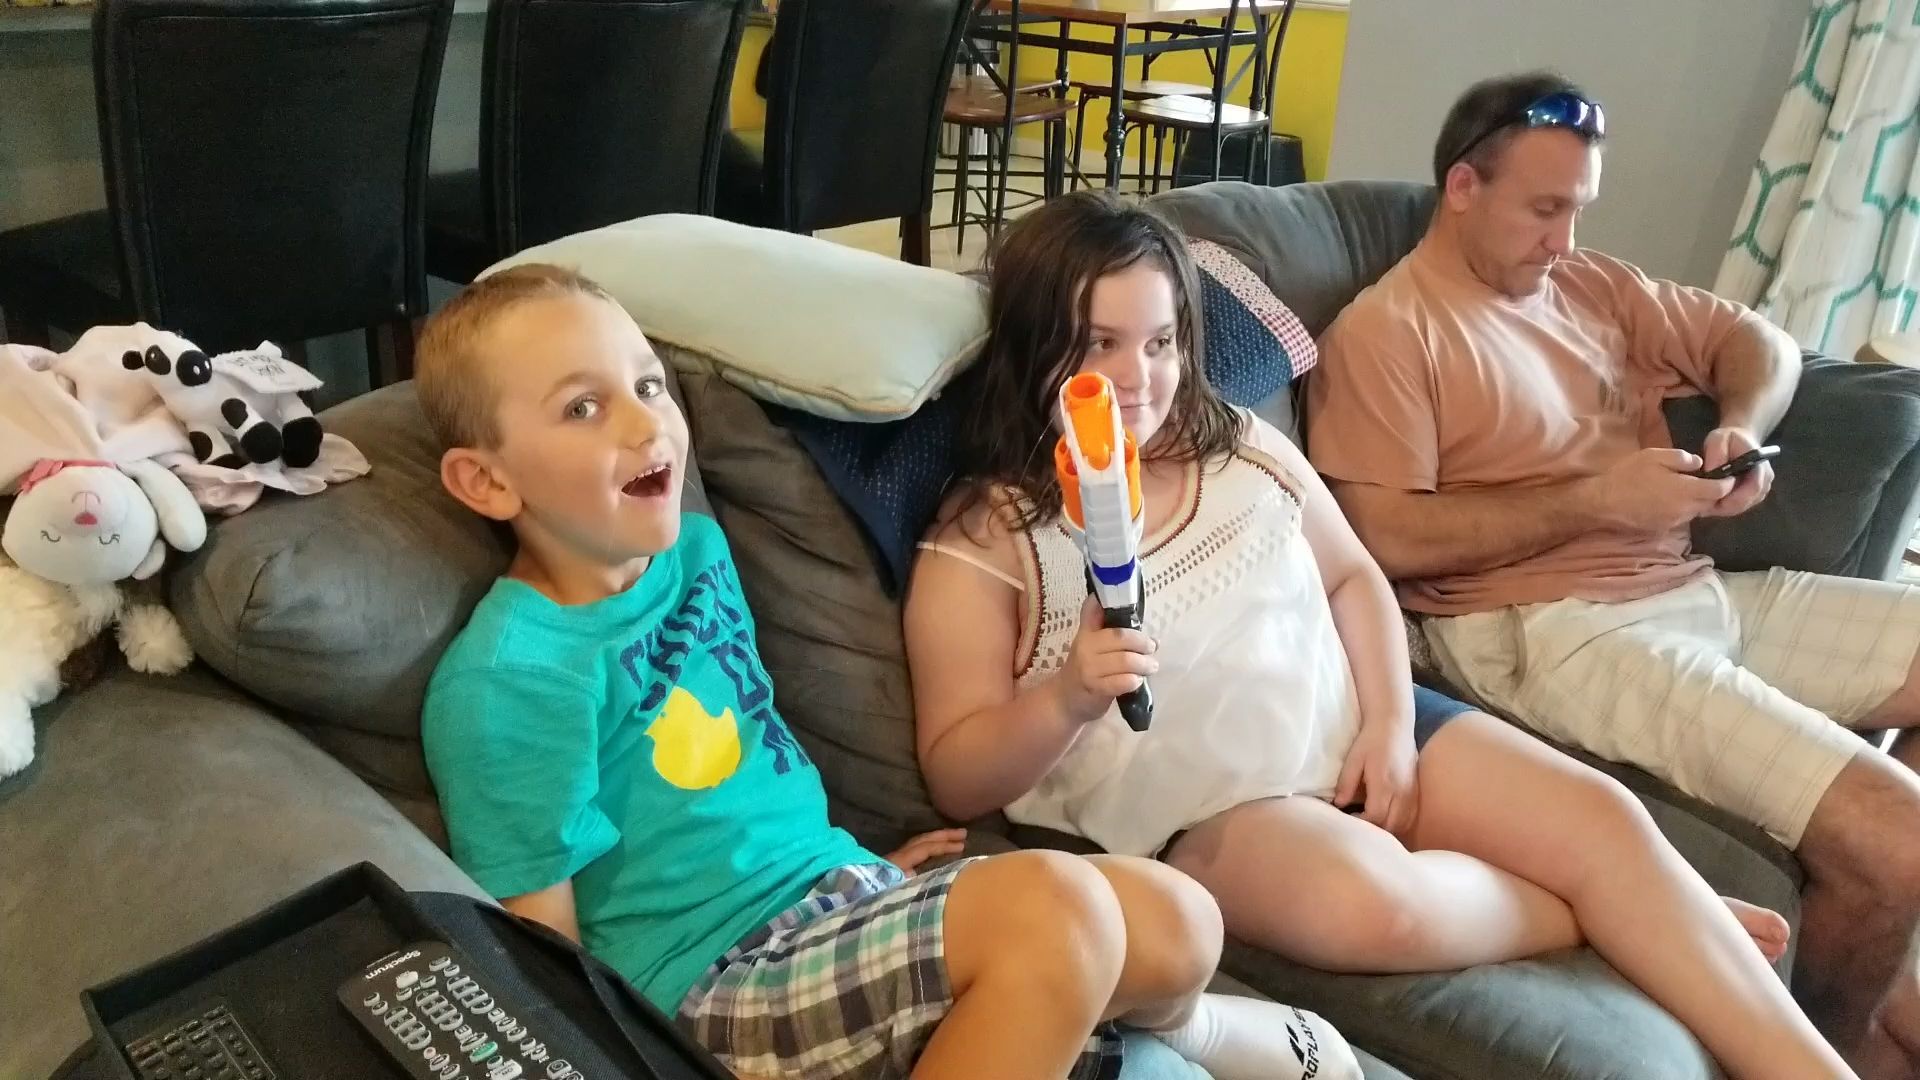 Boy pulls out his tooth with a NERF gun